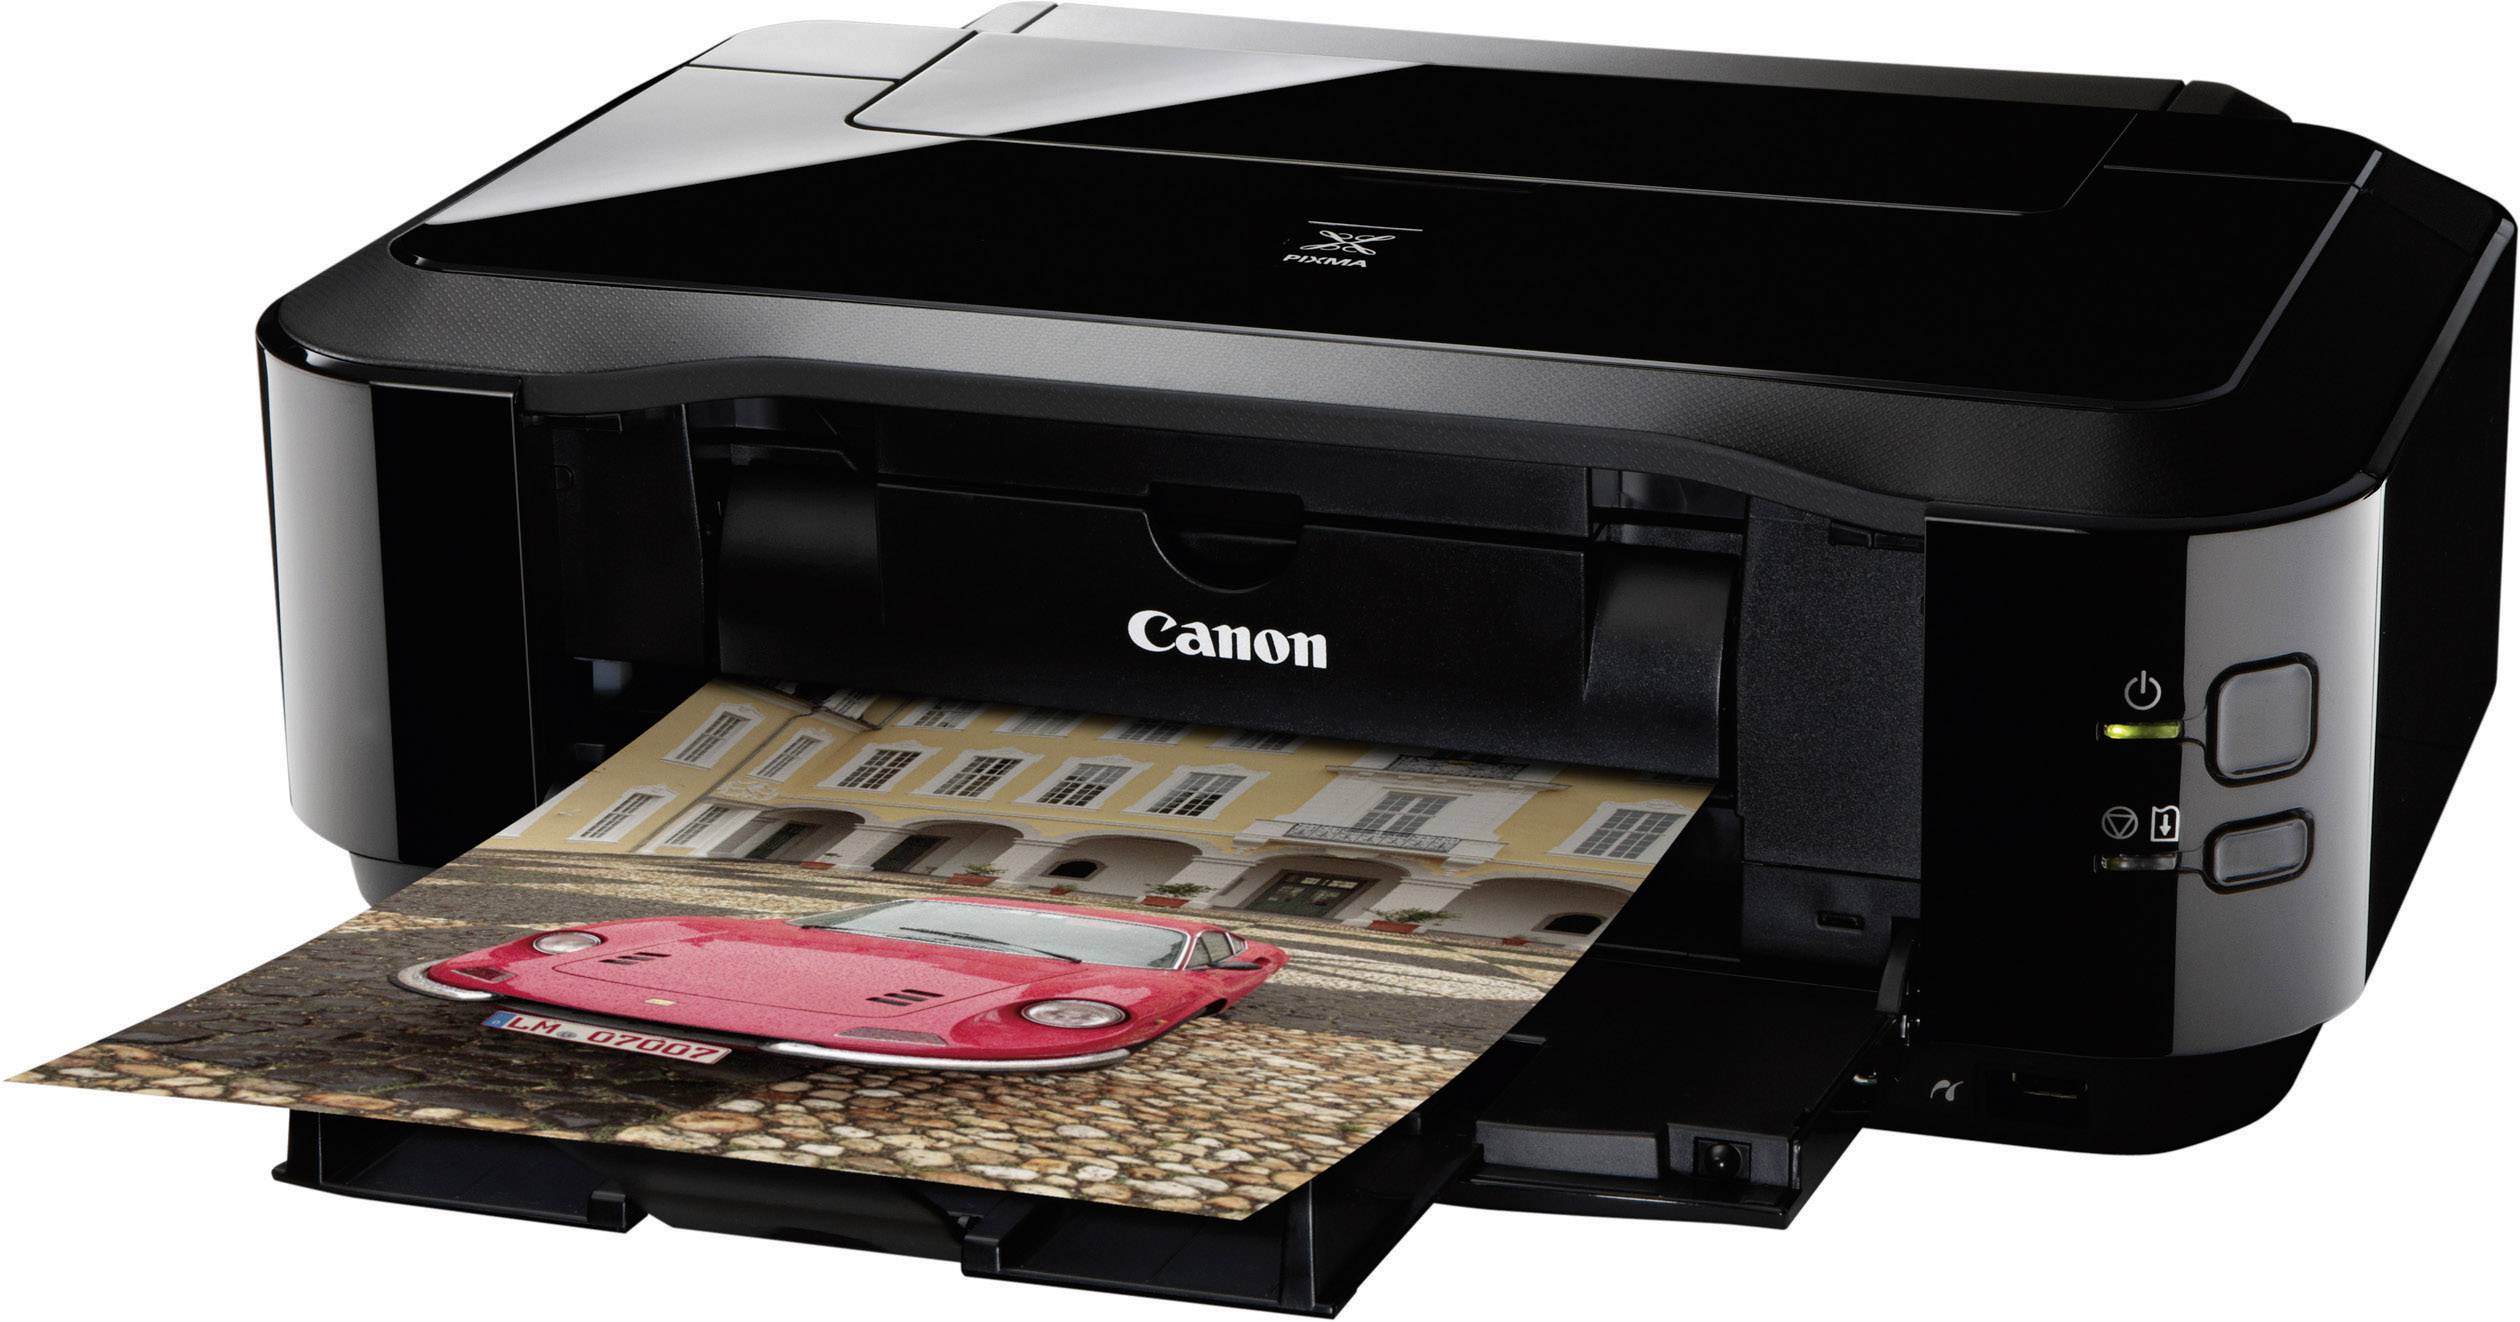 How to Install Canon PIXMA iP4920/iP4940/iP4950 Printer Driver on Debian - Featured